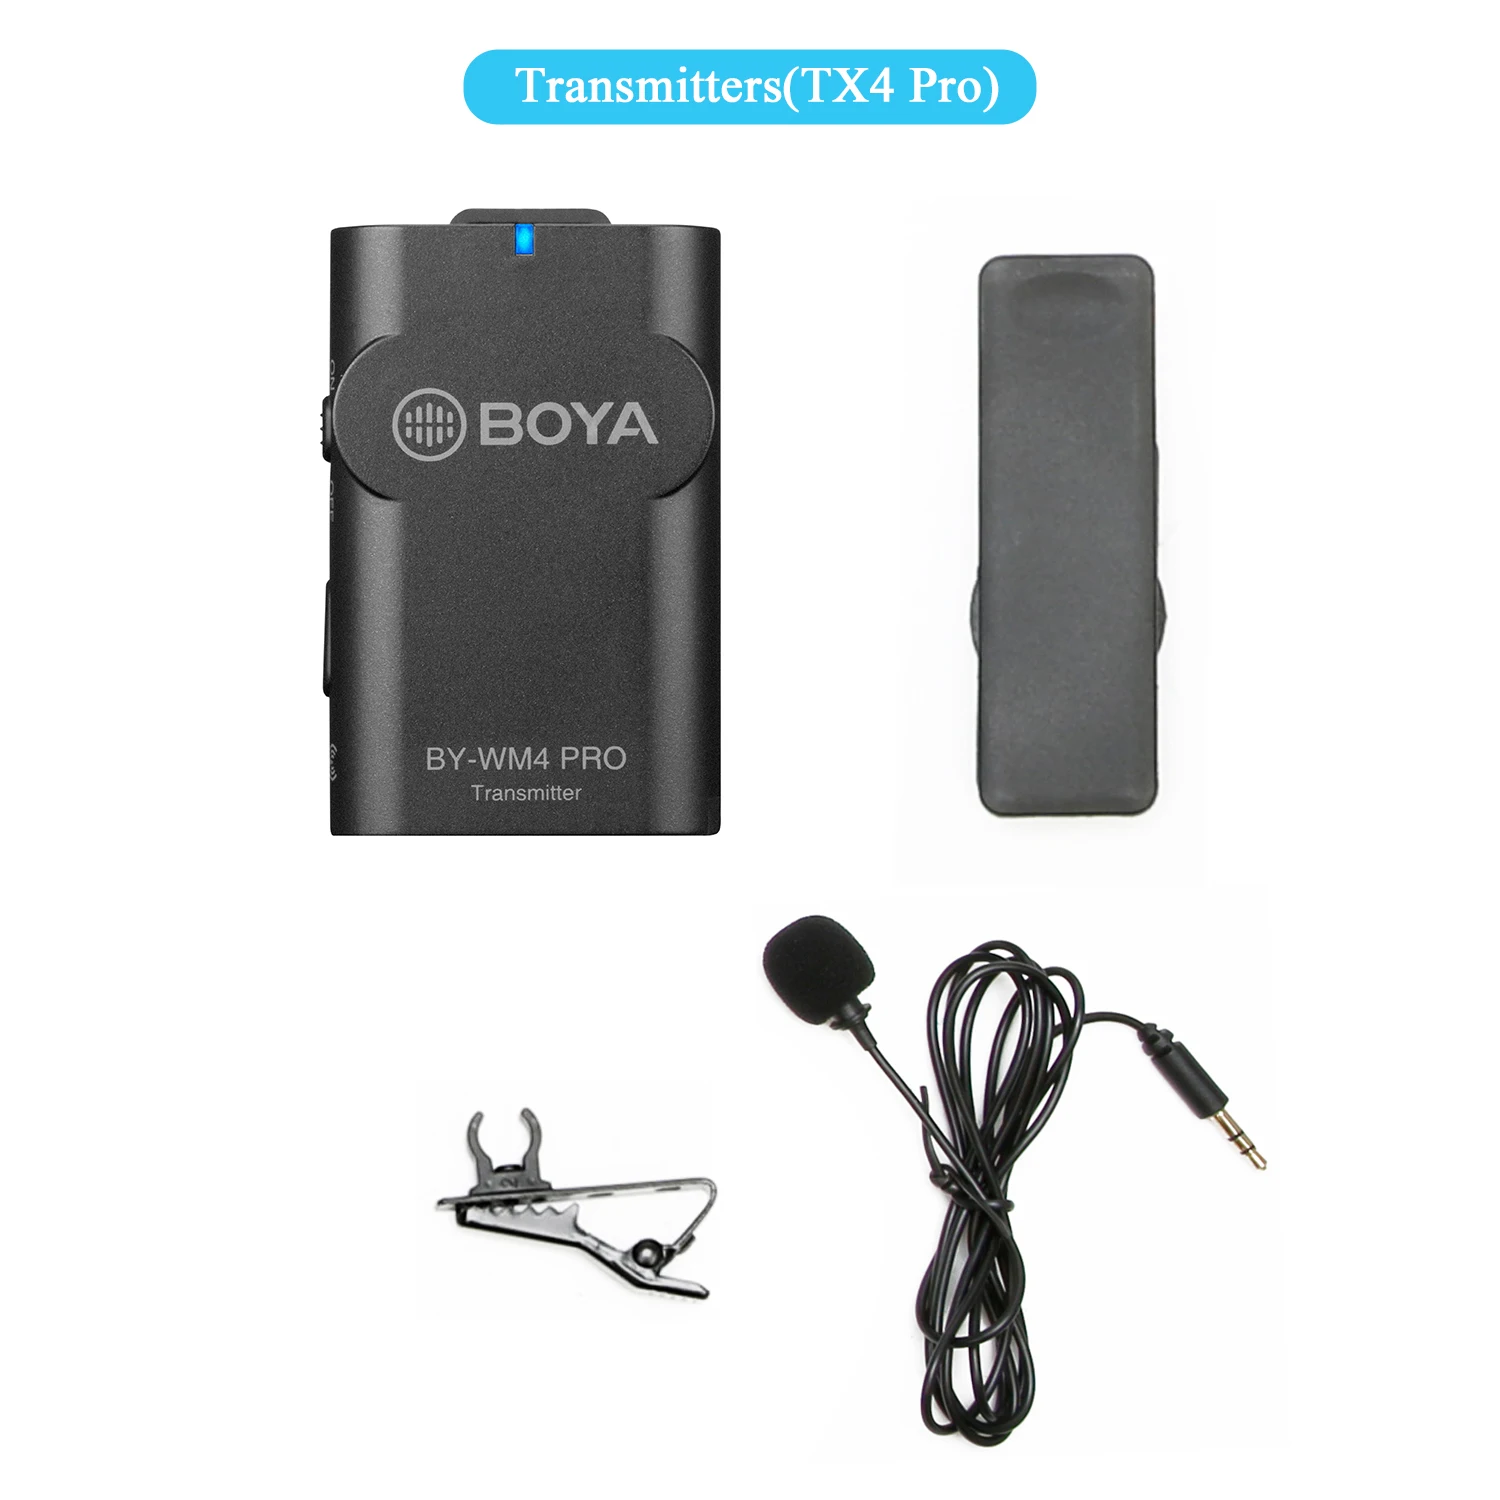 BOYA BY-WM4 PRO K1-K6 2.4GHz Professional Wireless Condenser Microphone for PC Mobile Phone iPhone Android Lavalier Microphone 